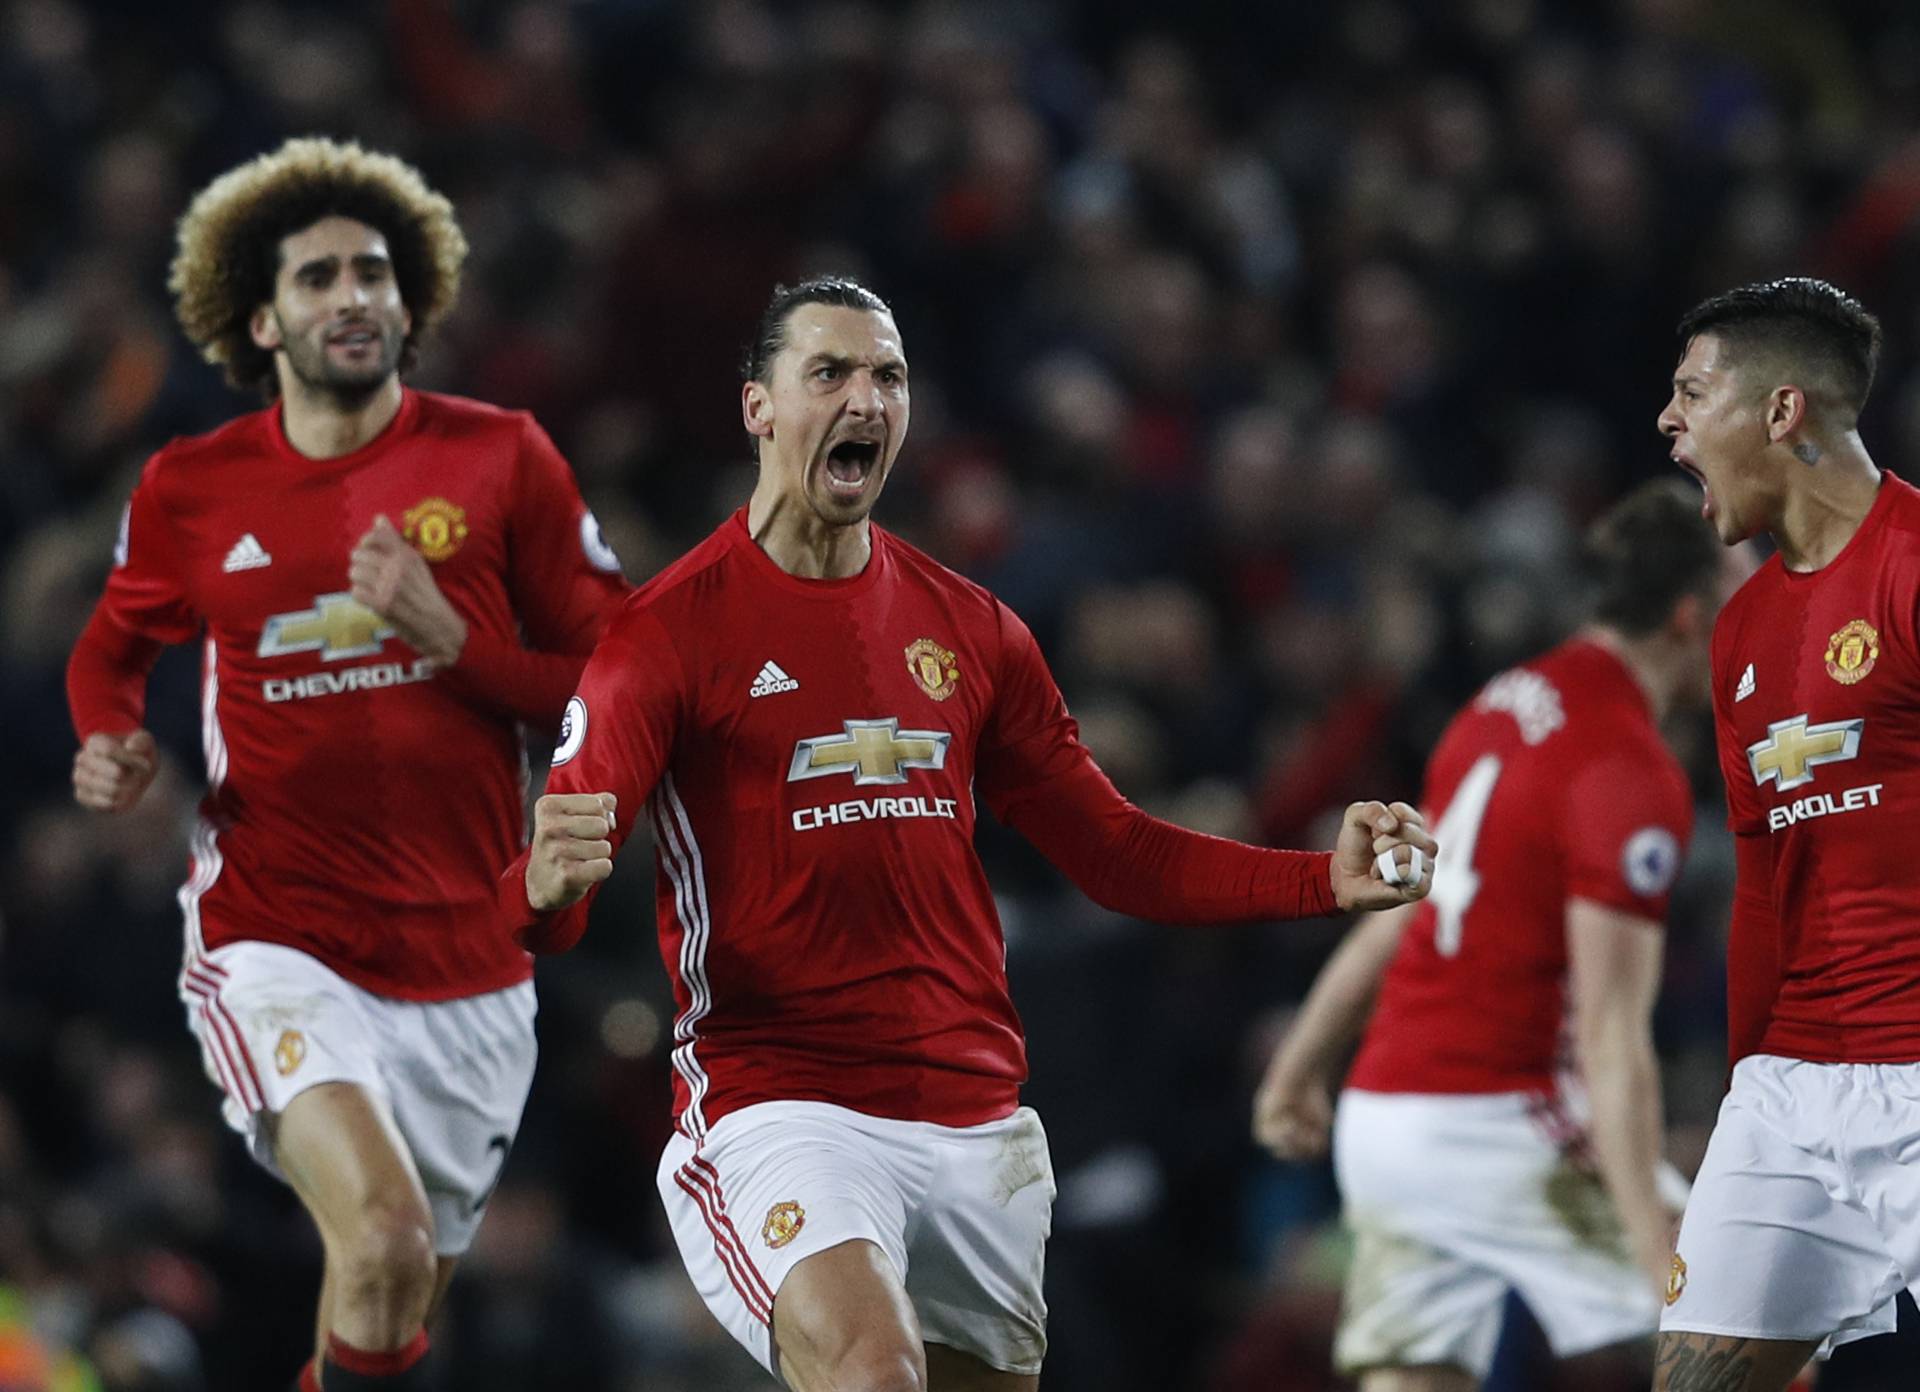 Manchester United's Zlatan Ibrahimovic celebrates scoring their first goal with Marcos Rojo and Marouane Fellaini